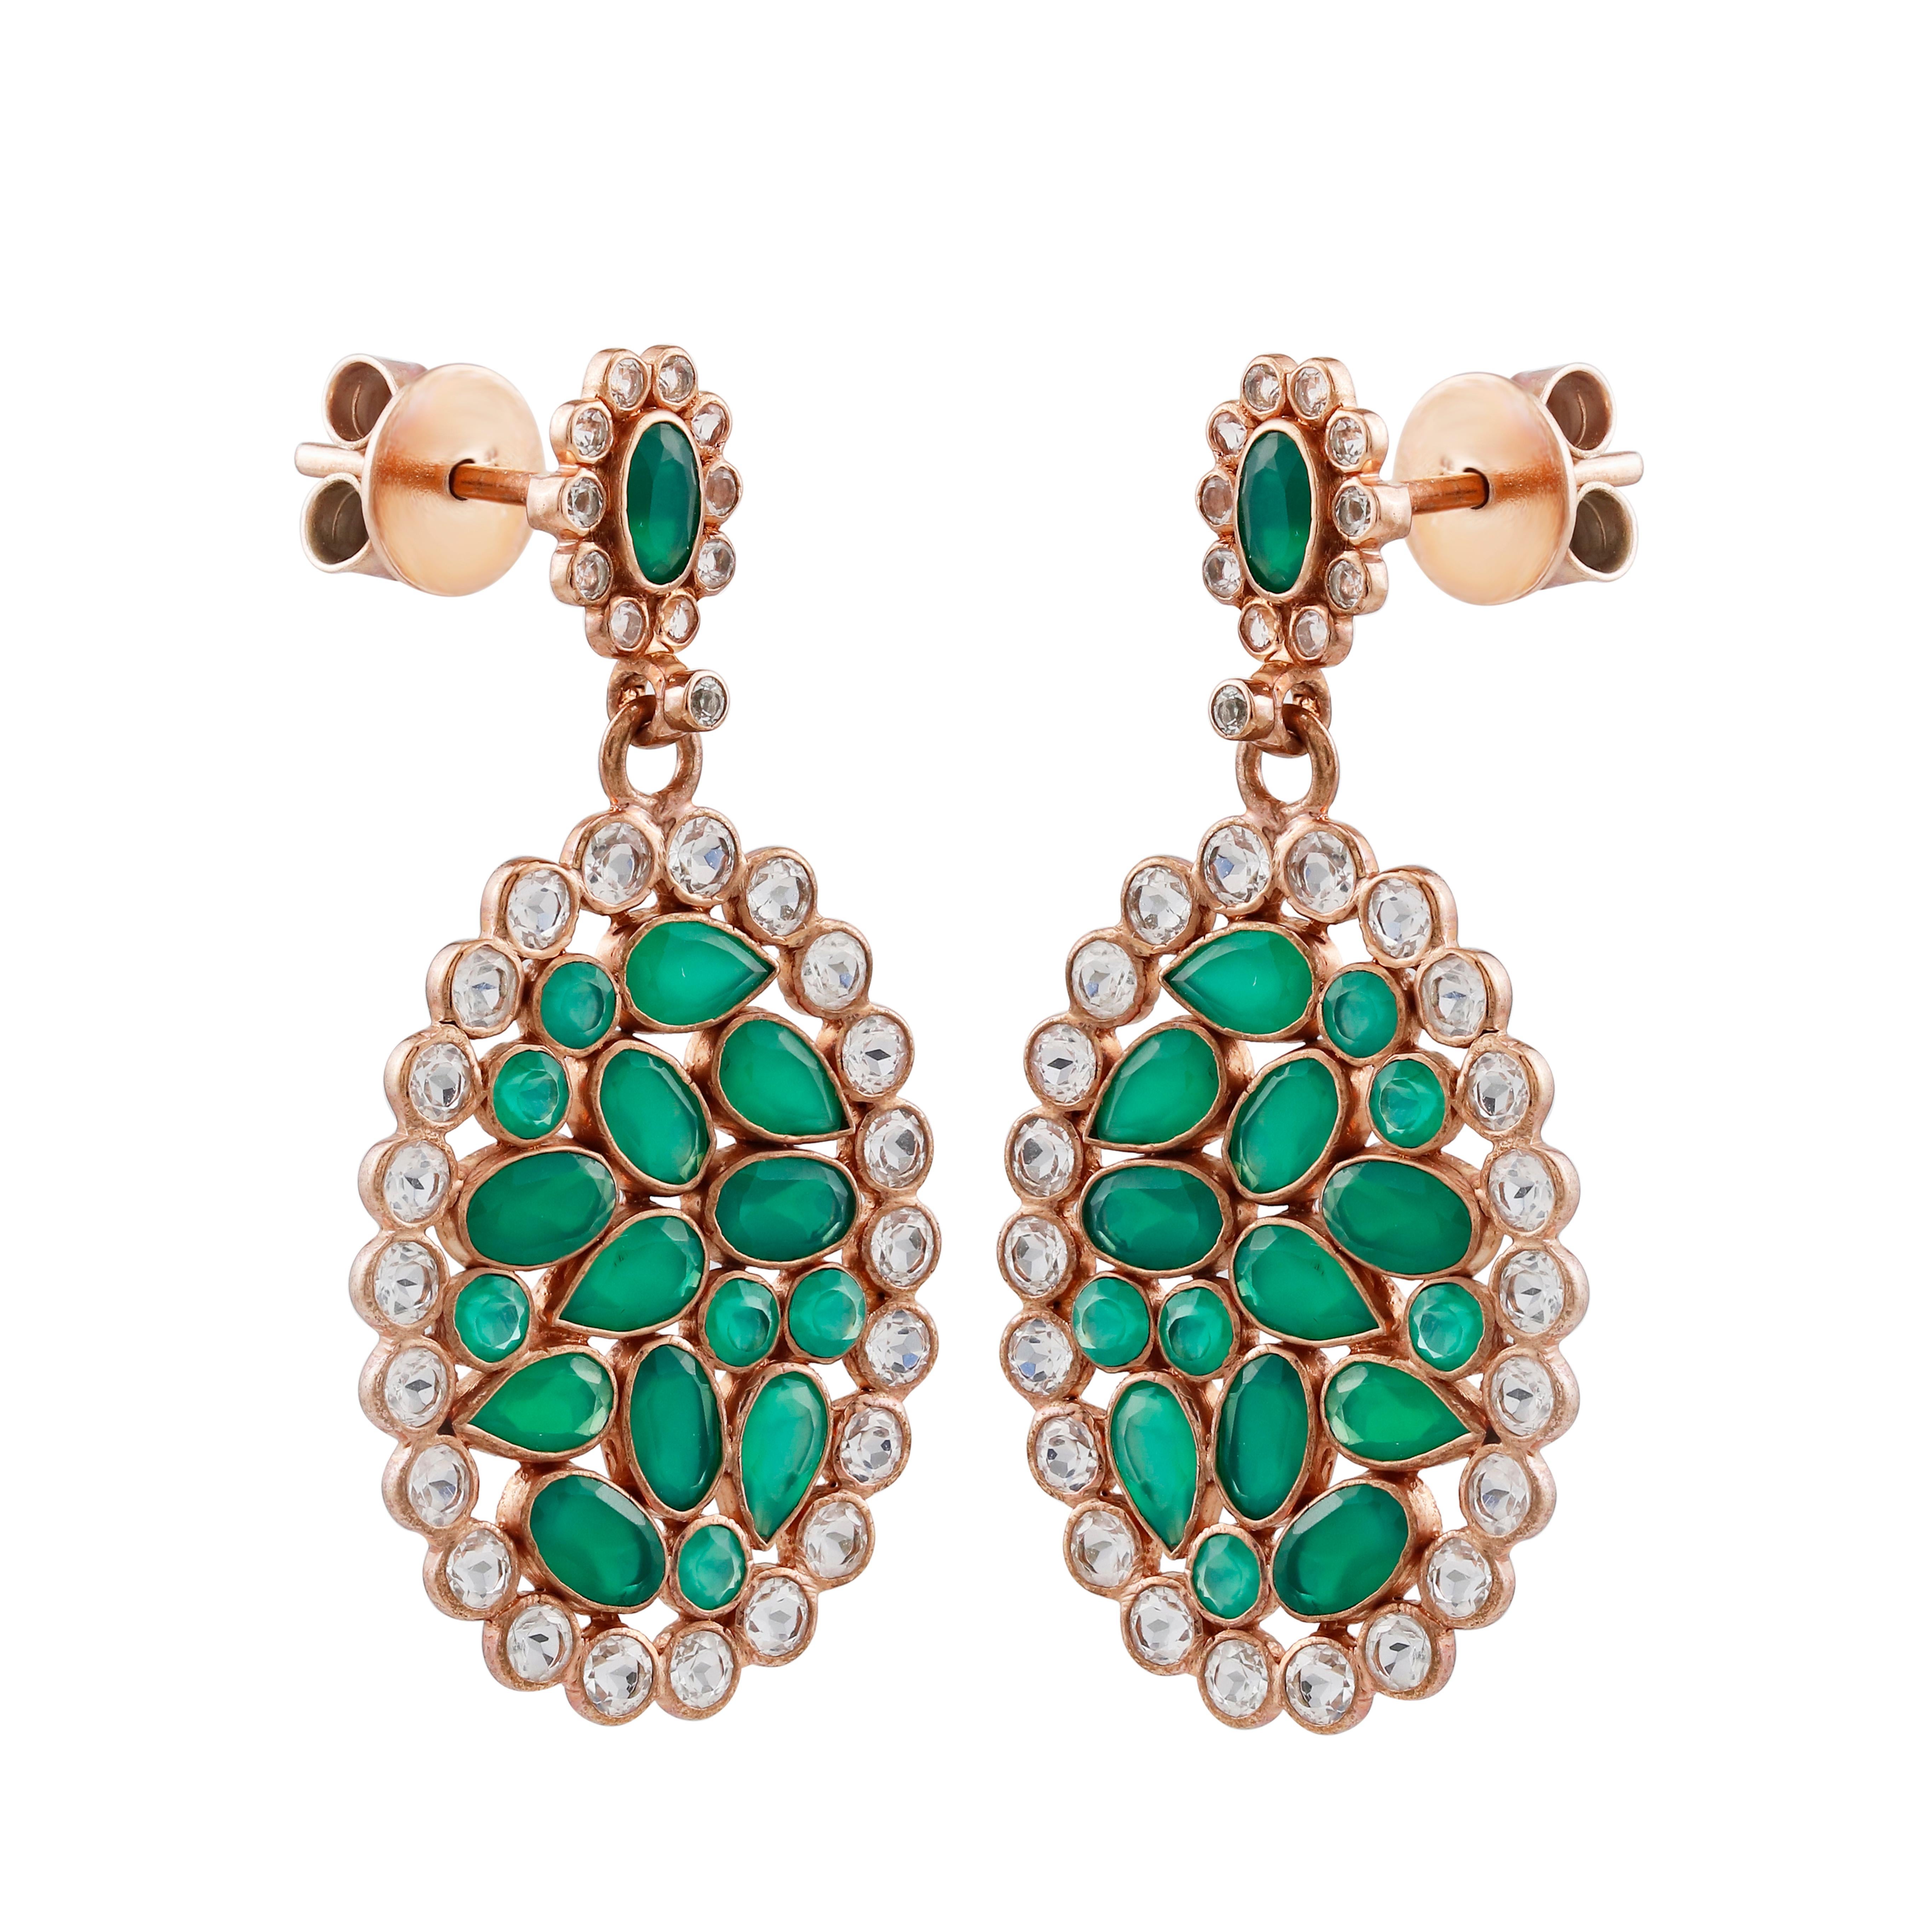 Vibrant gemstones that are sure to take all your attention! Hand created in sterling silver, plated in rose.  Each earring features vivid green onyx haloed in sparkling topazes in the drop and the top. The floral inspired earring adds glamour with